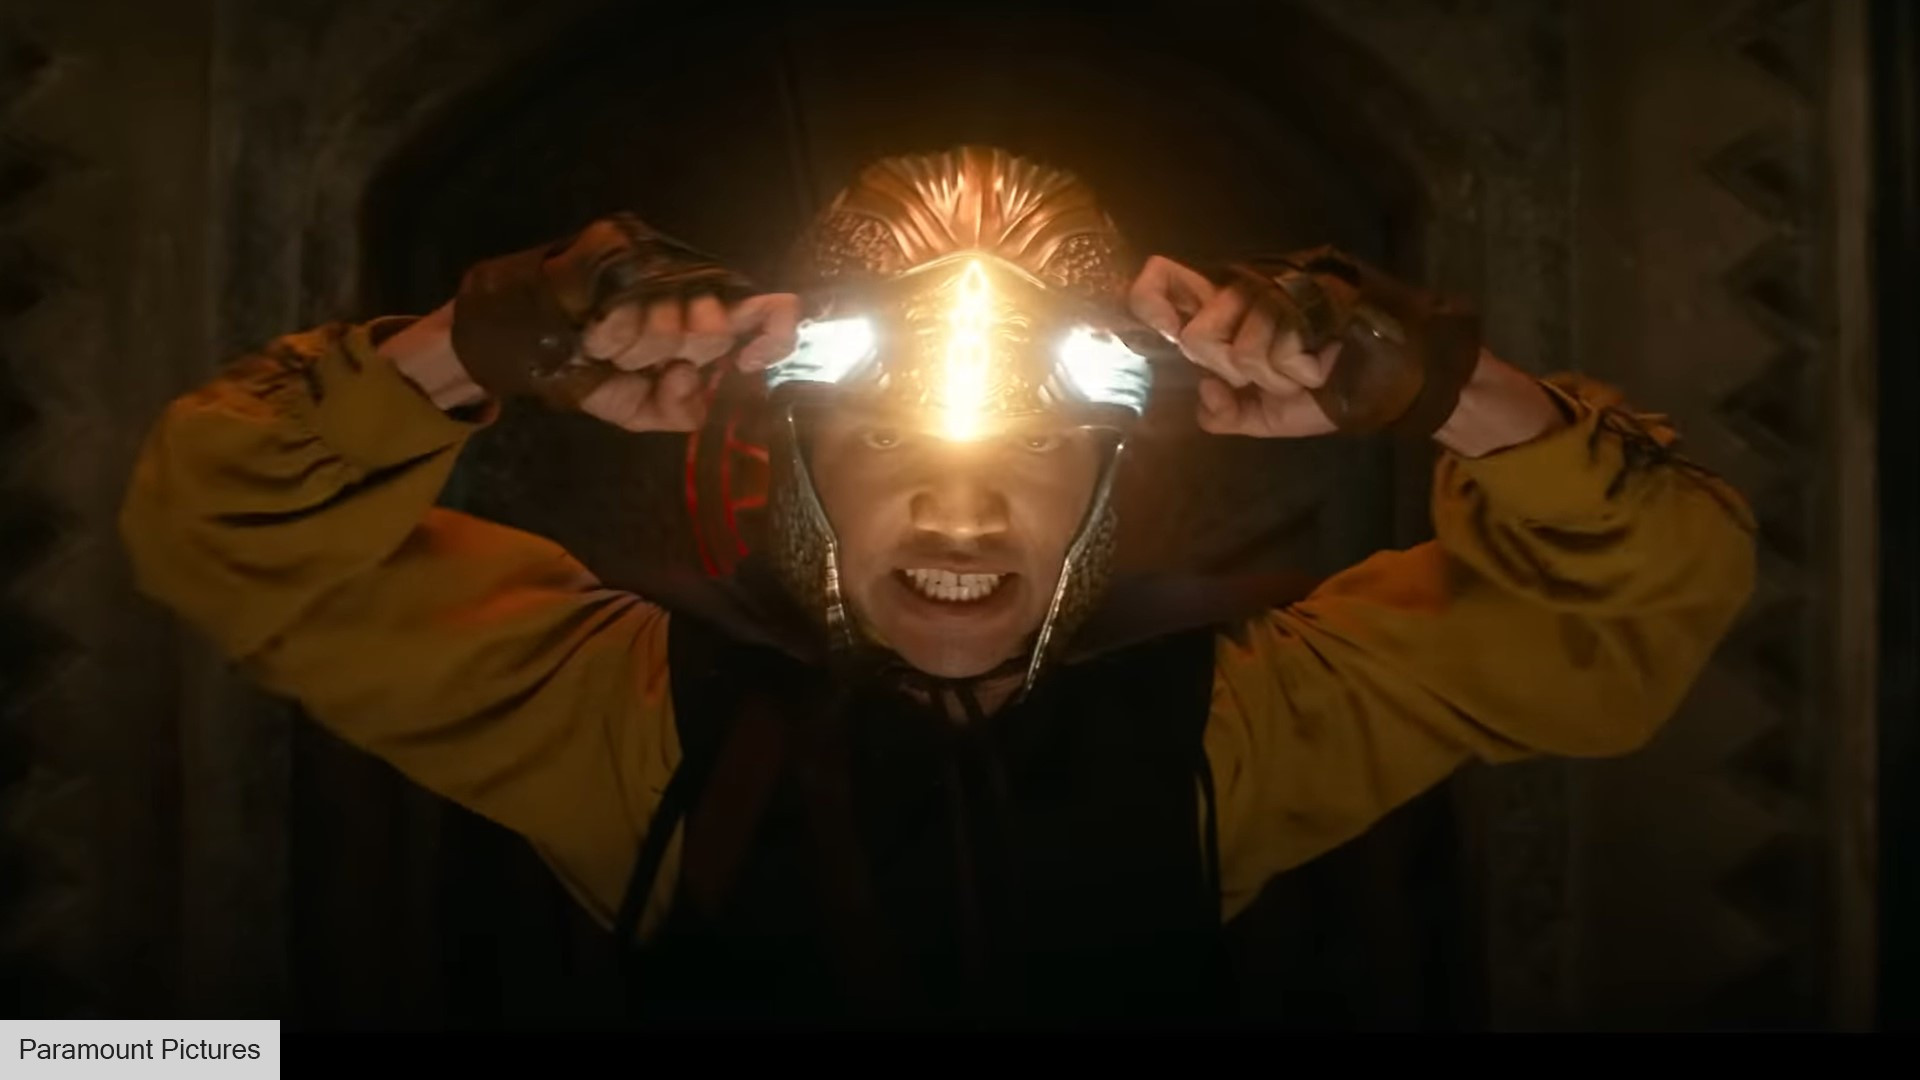 DnD movie mistakes - Paramount image of Simon the Sorcerer from D&D Honor Among Thieves